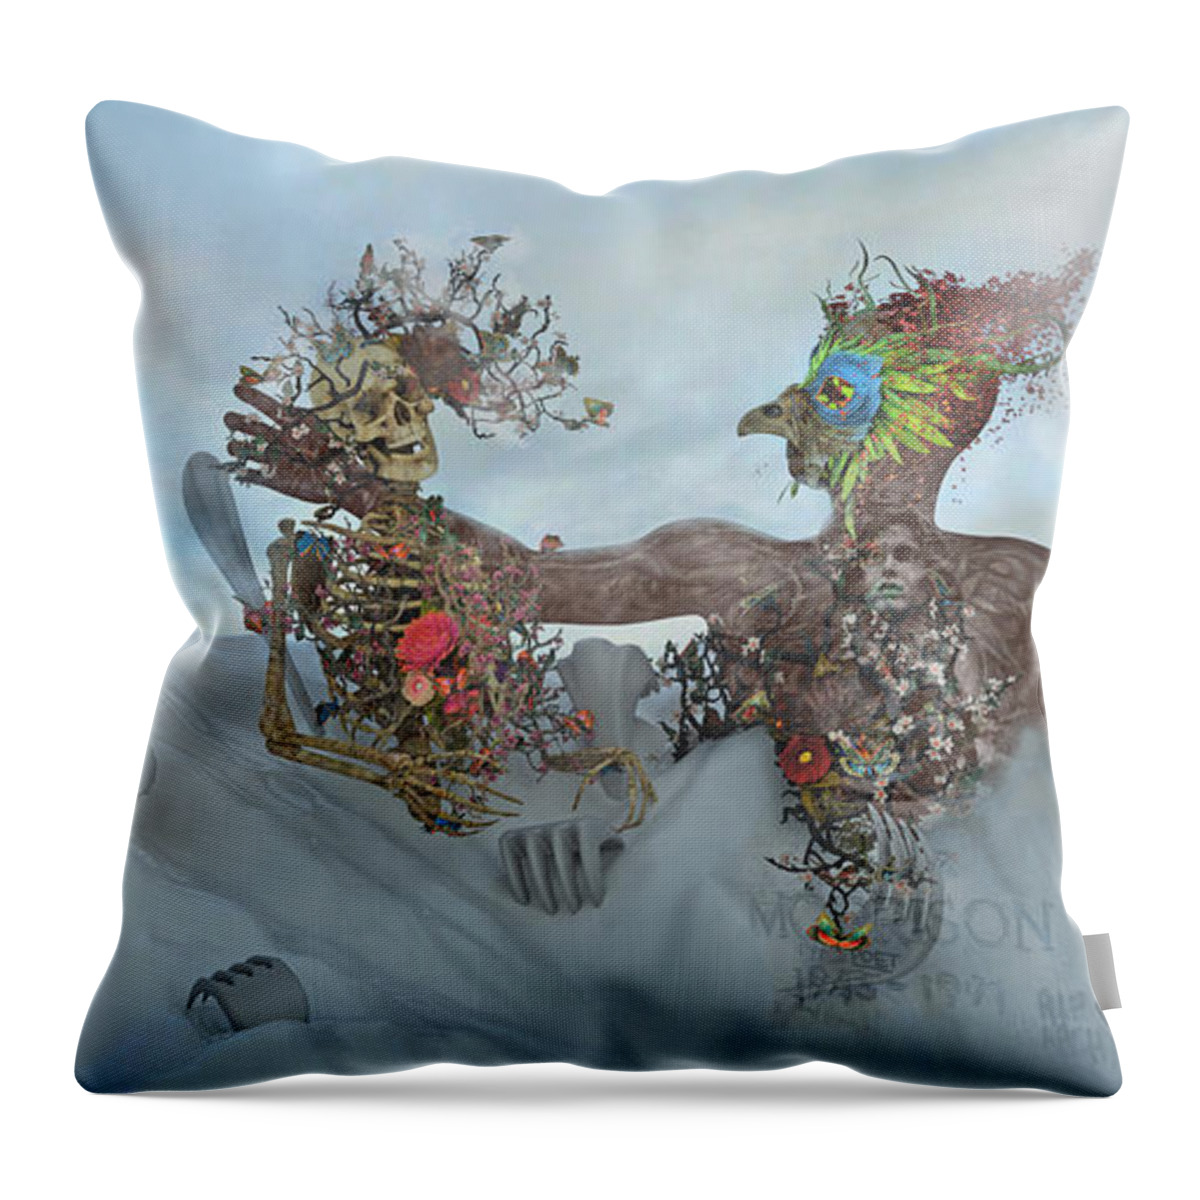 3d Throw Pillow featuring the digital art Proud to Be a Part of This Number by Betsy Knapp